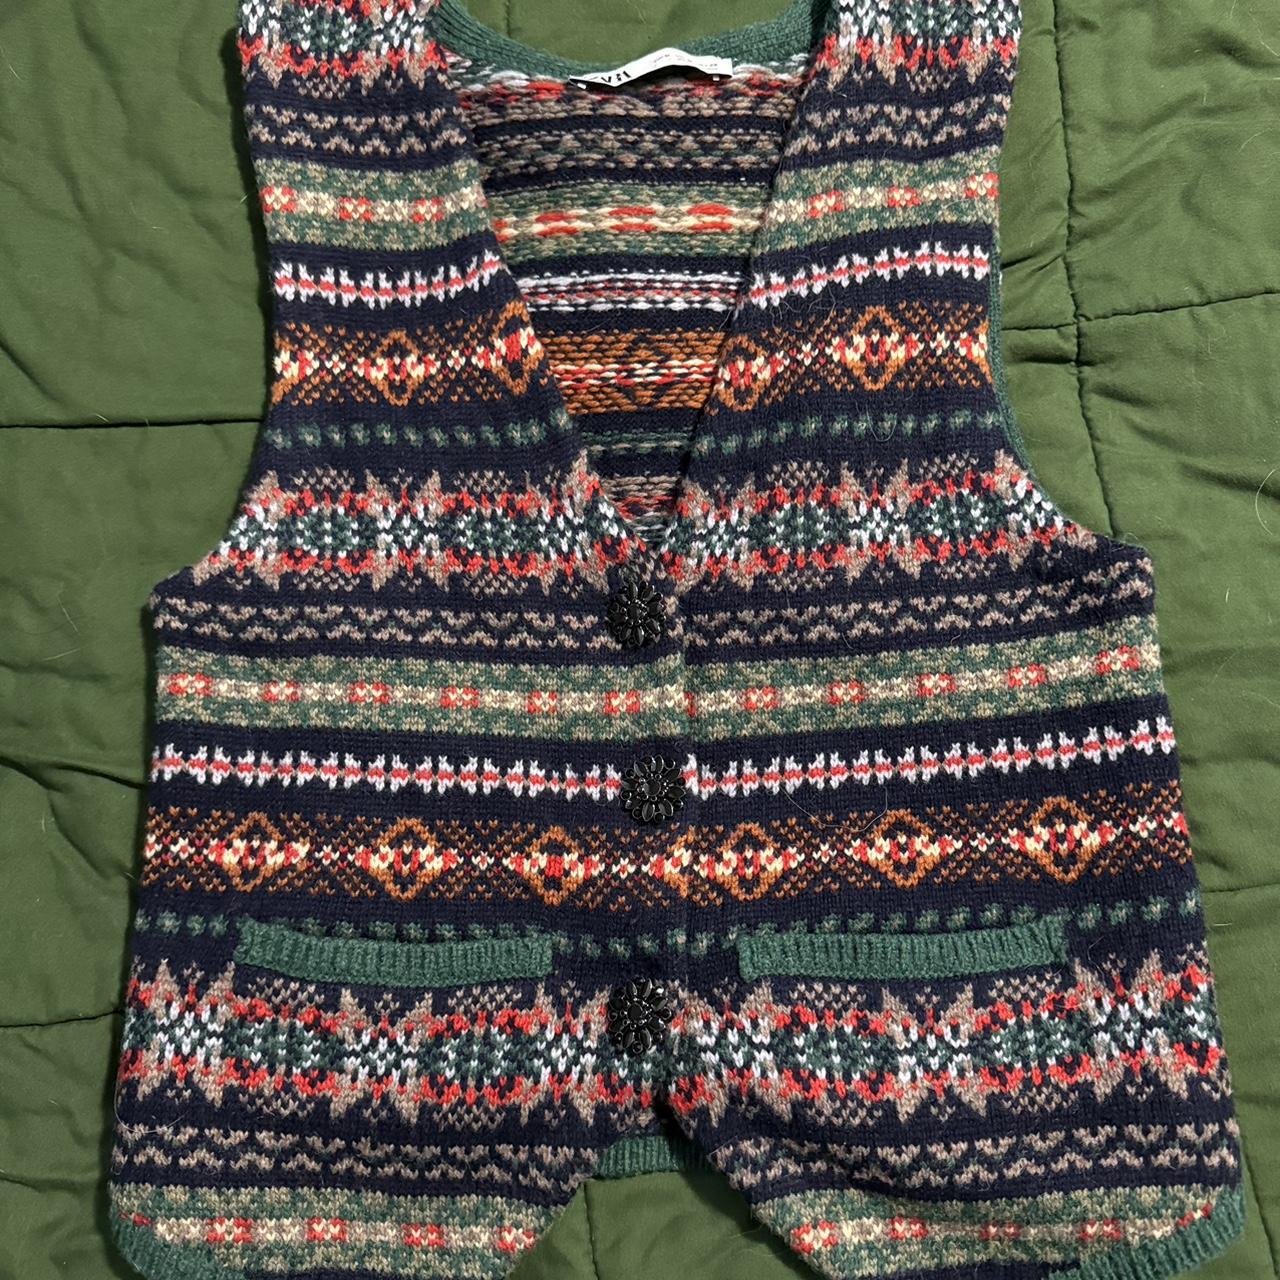 item listed by kenzluvsthrifts